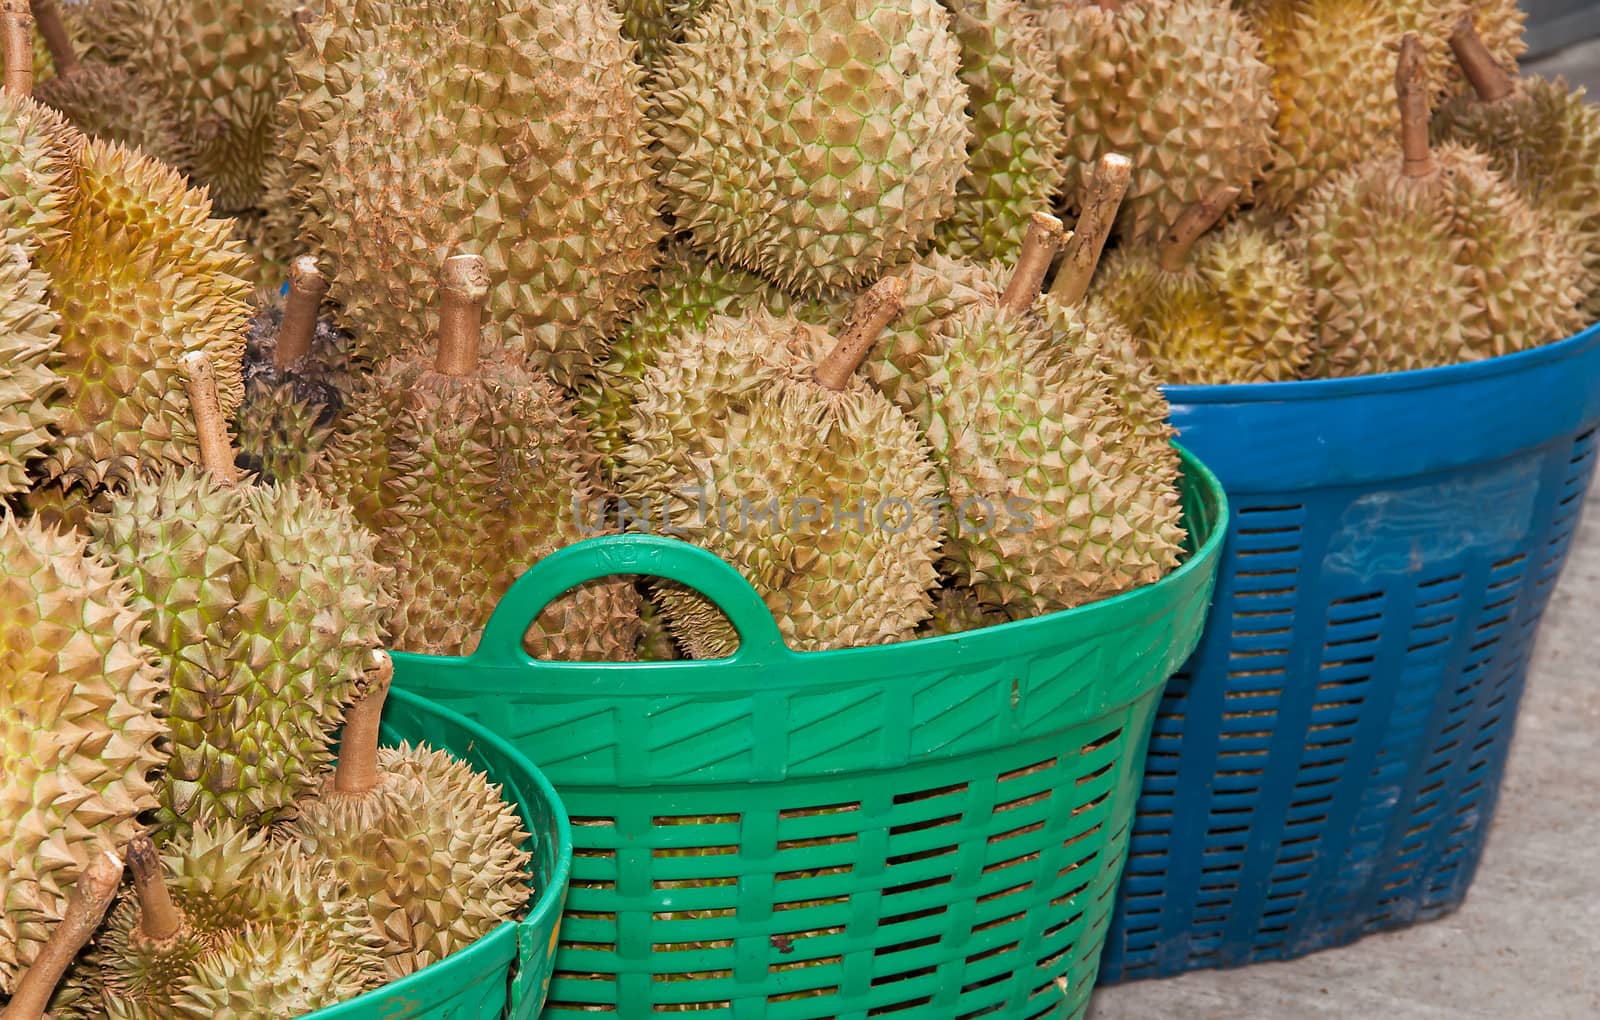 pile of durian In the basket for sale in local market in thailand